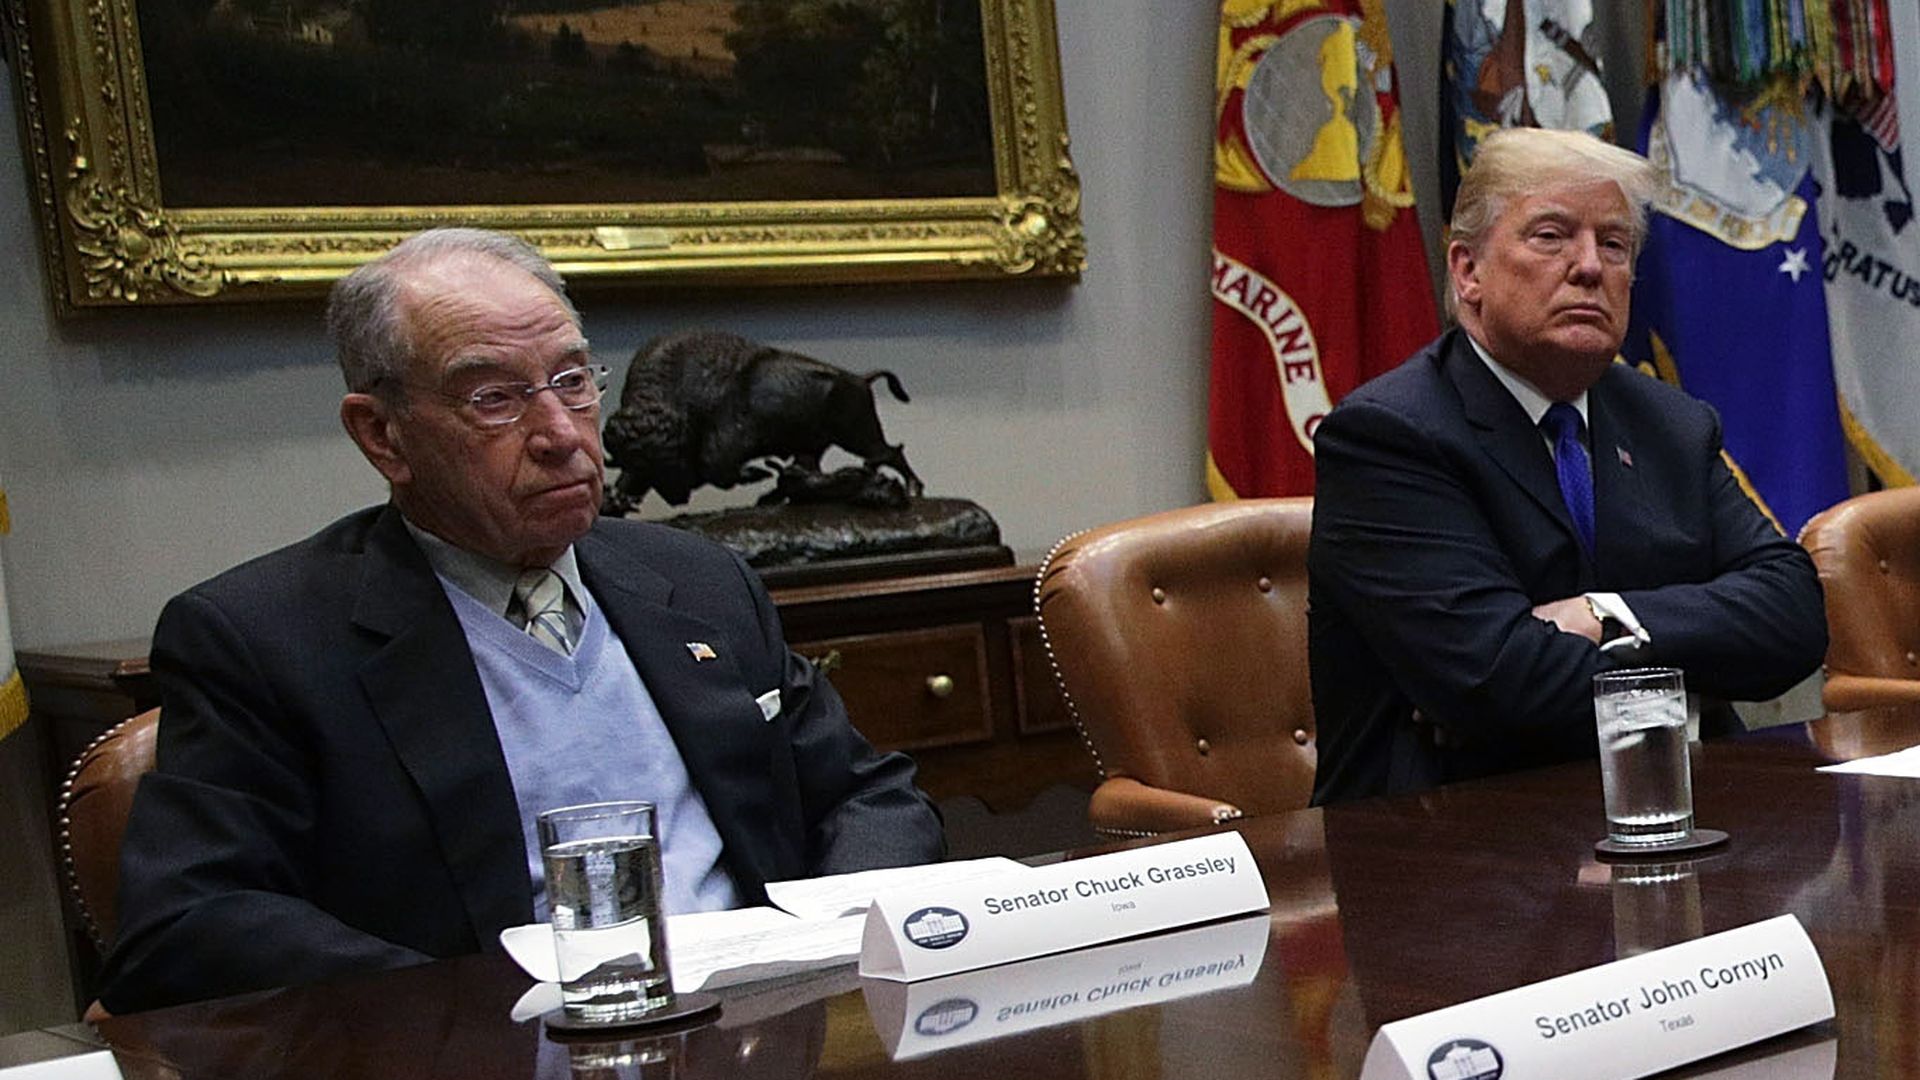 Donald Trump and Chuck Grassley seated next to each other.